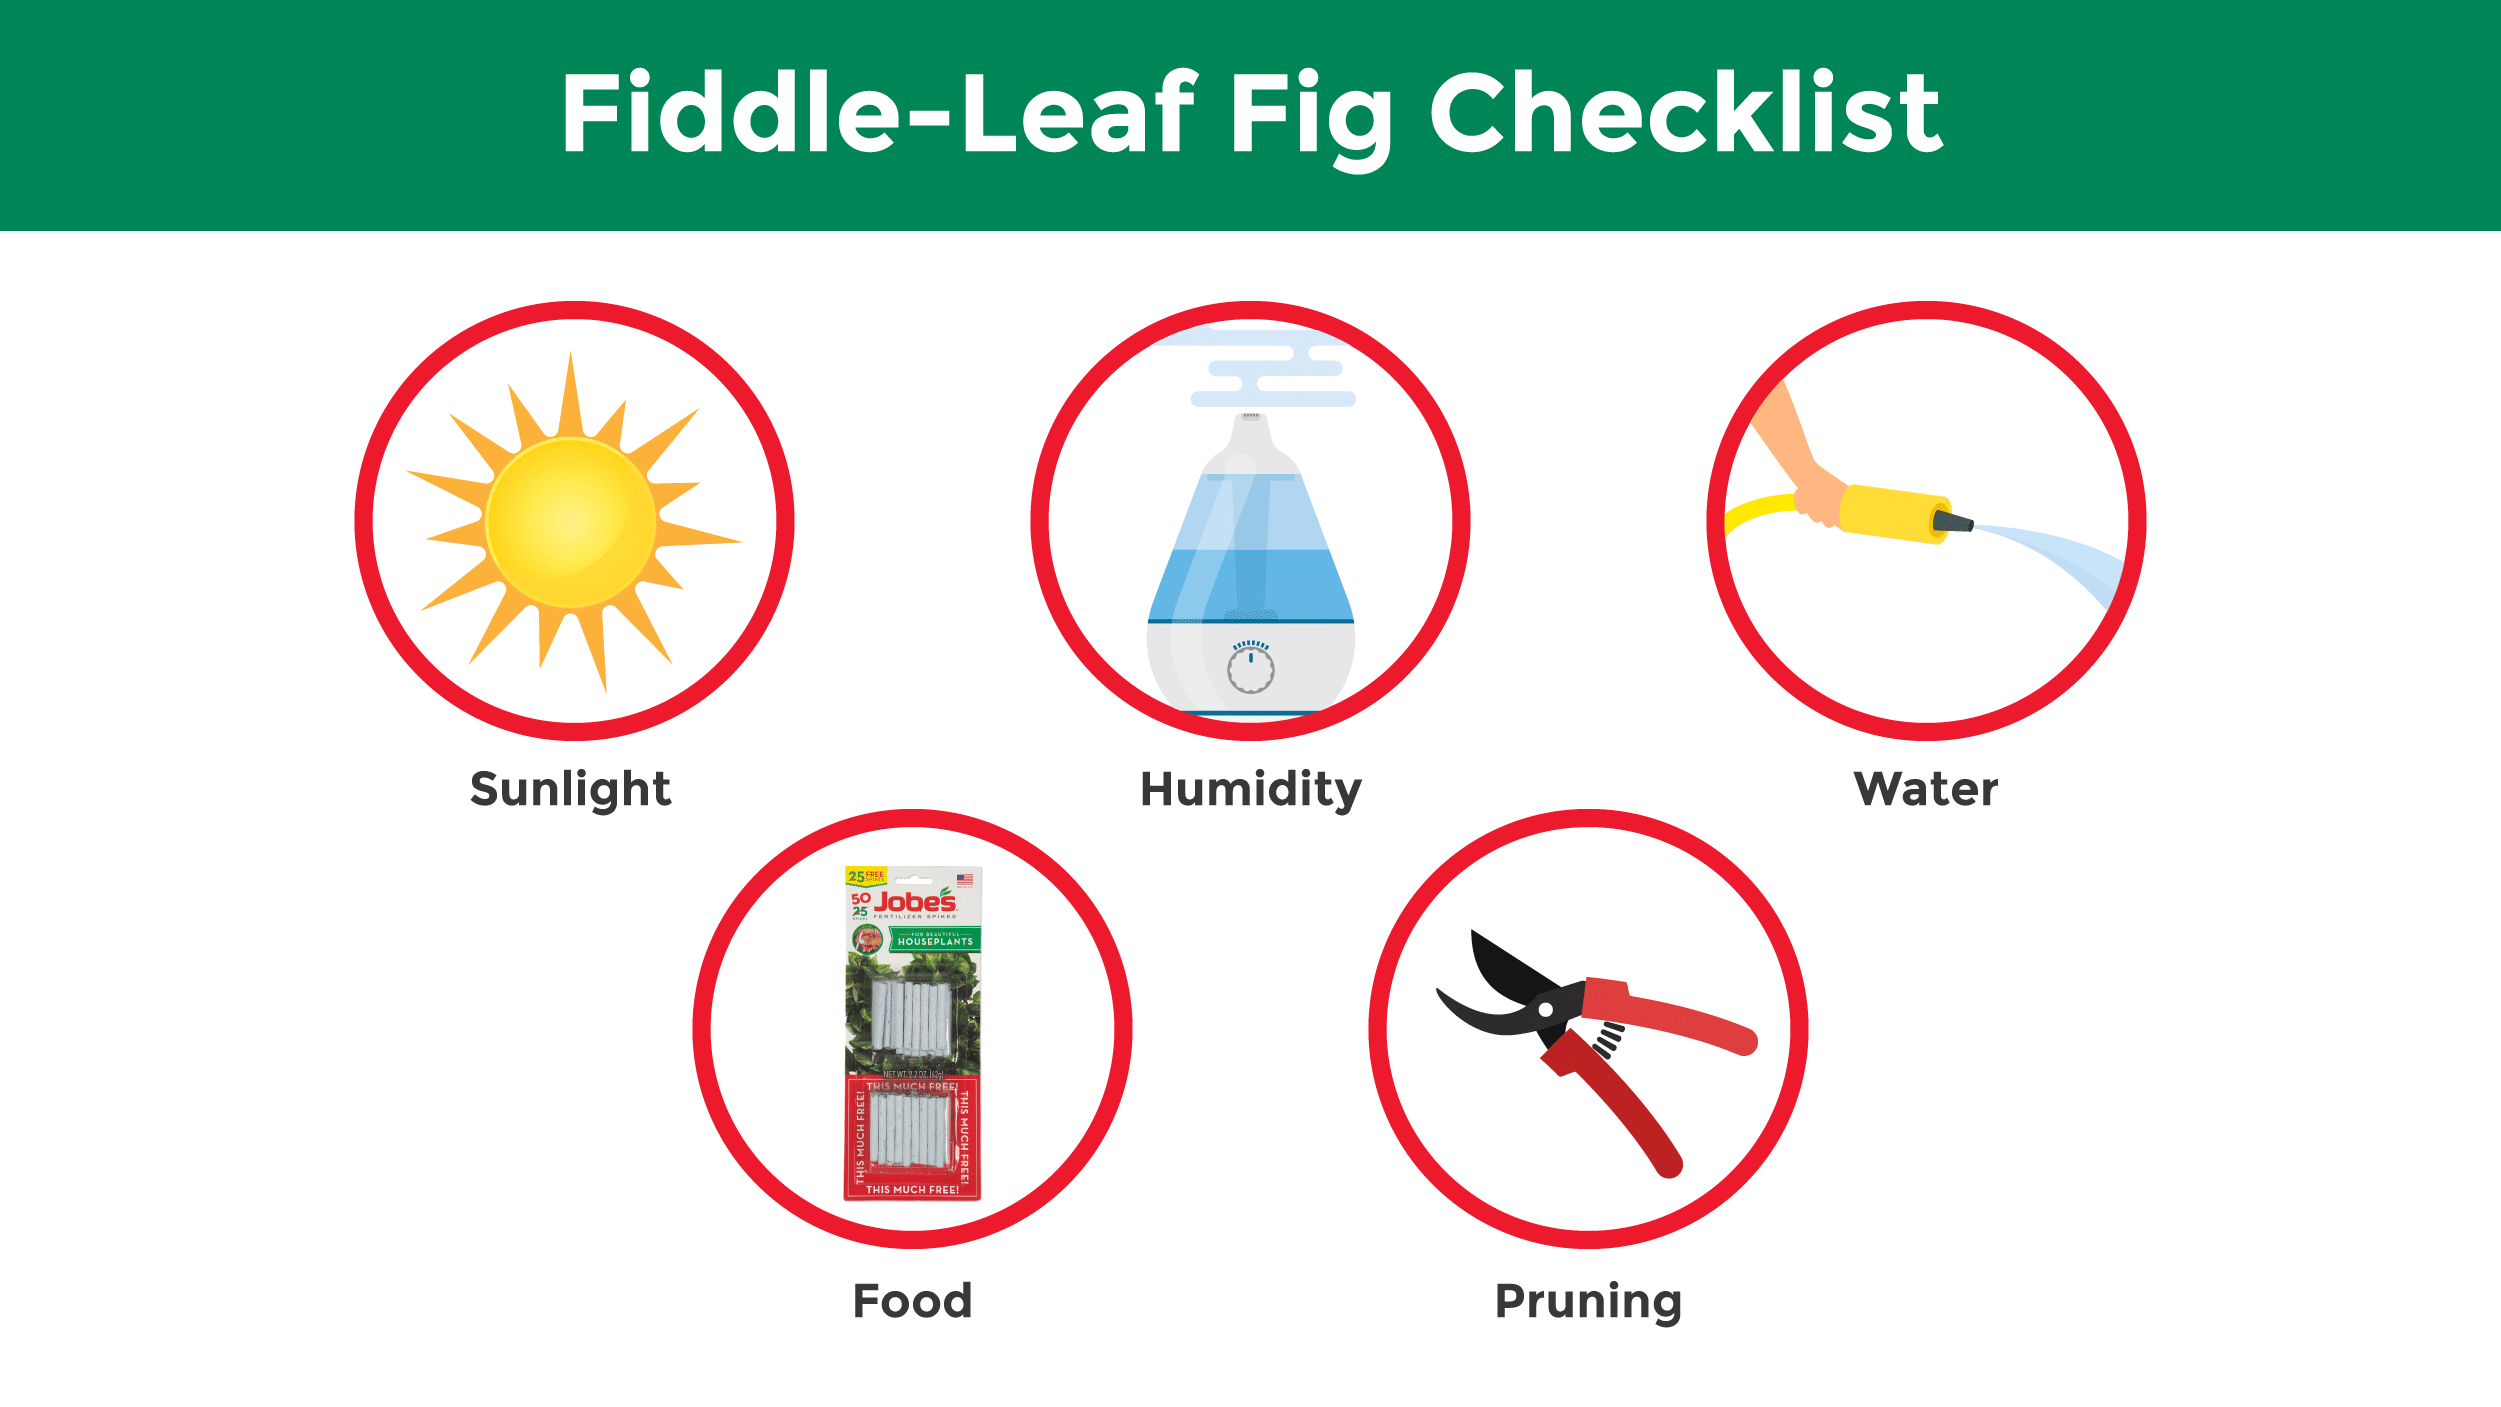 Illustration featuring a checklist of the best steps for a flourishing fiddle-leaf fig. 